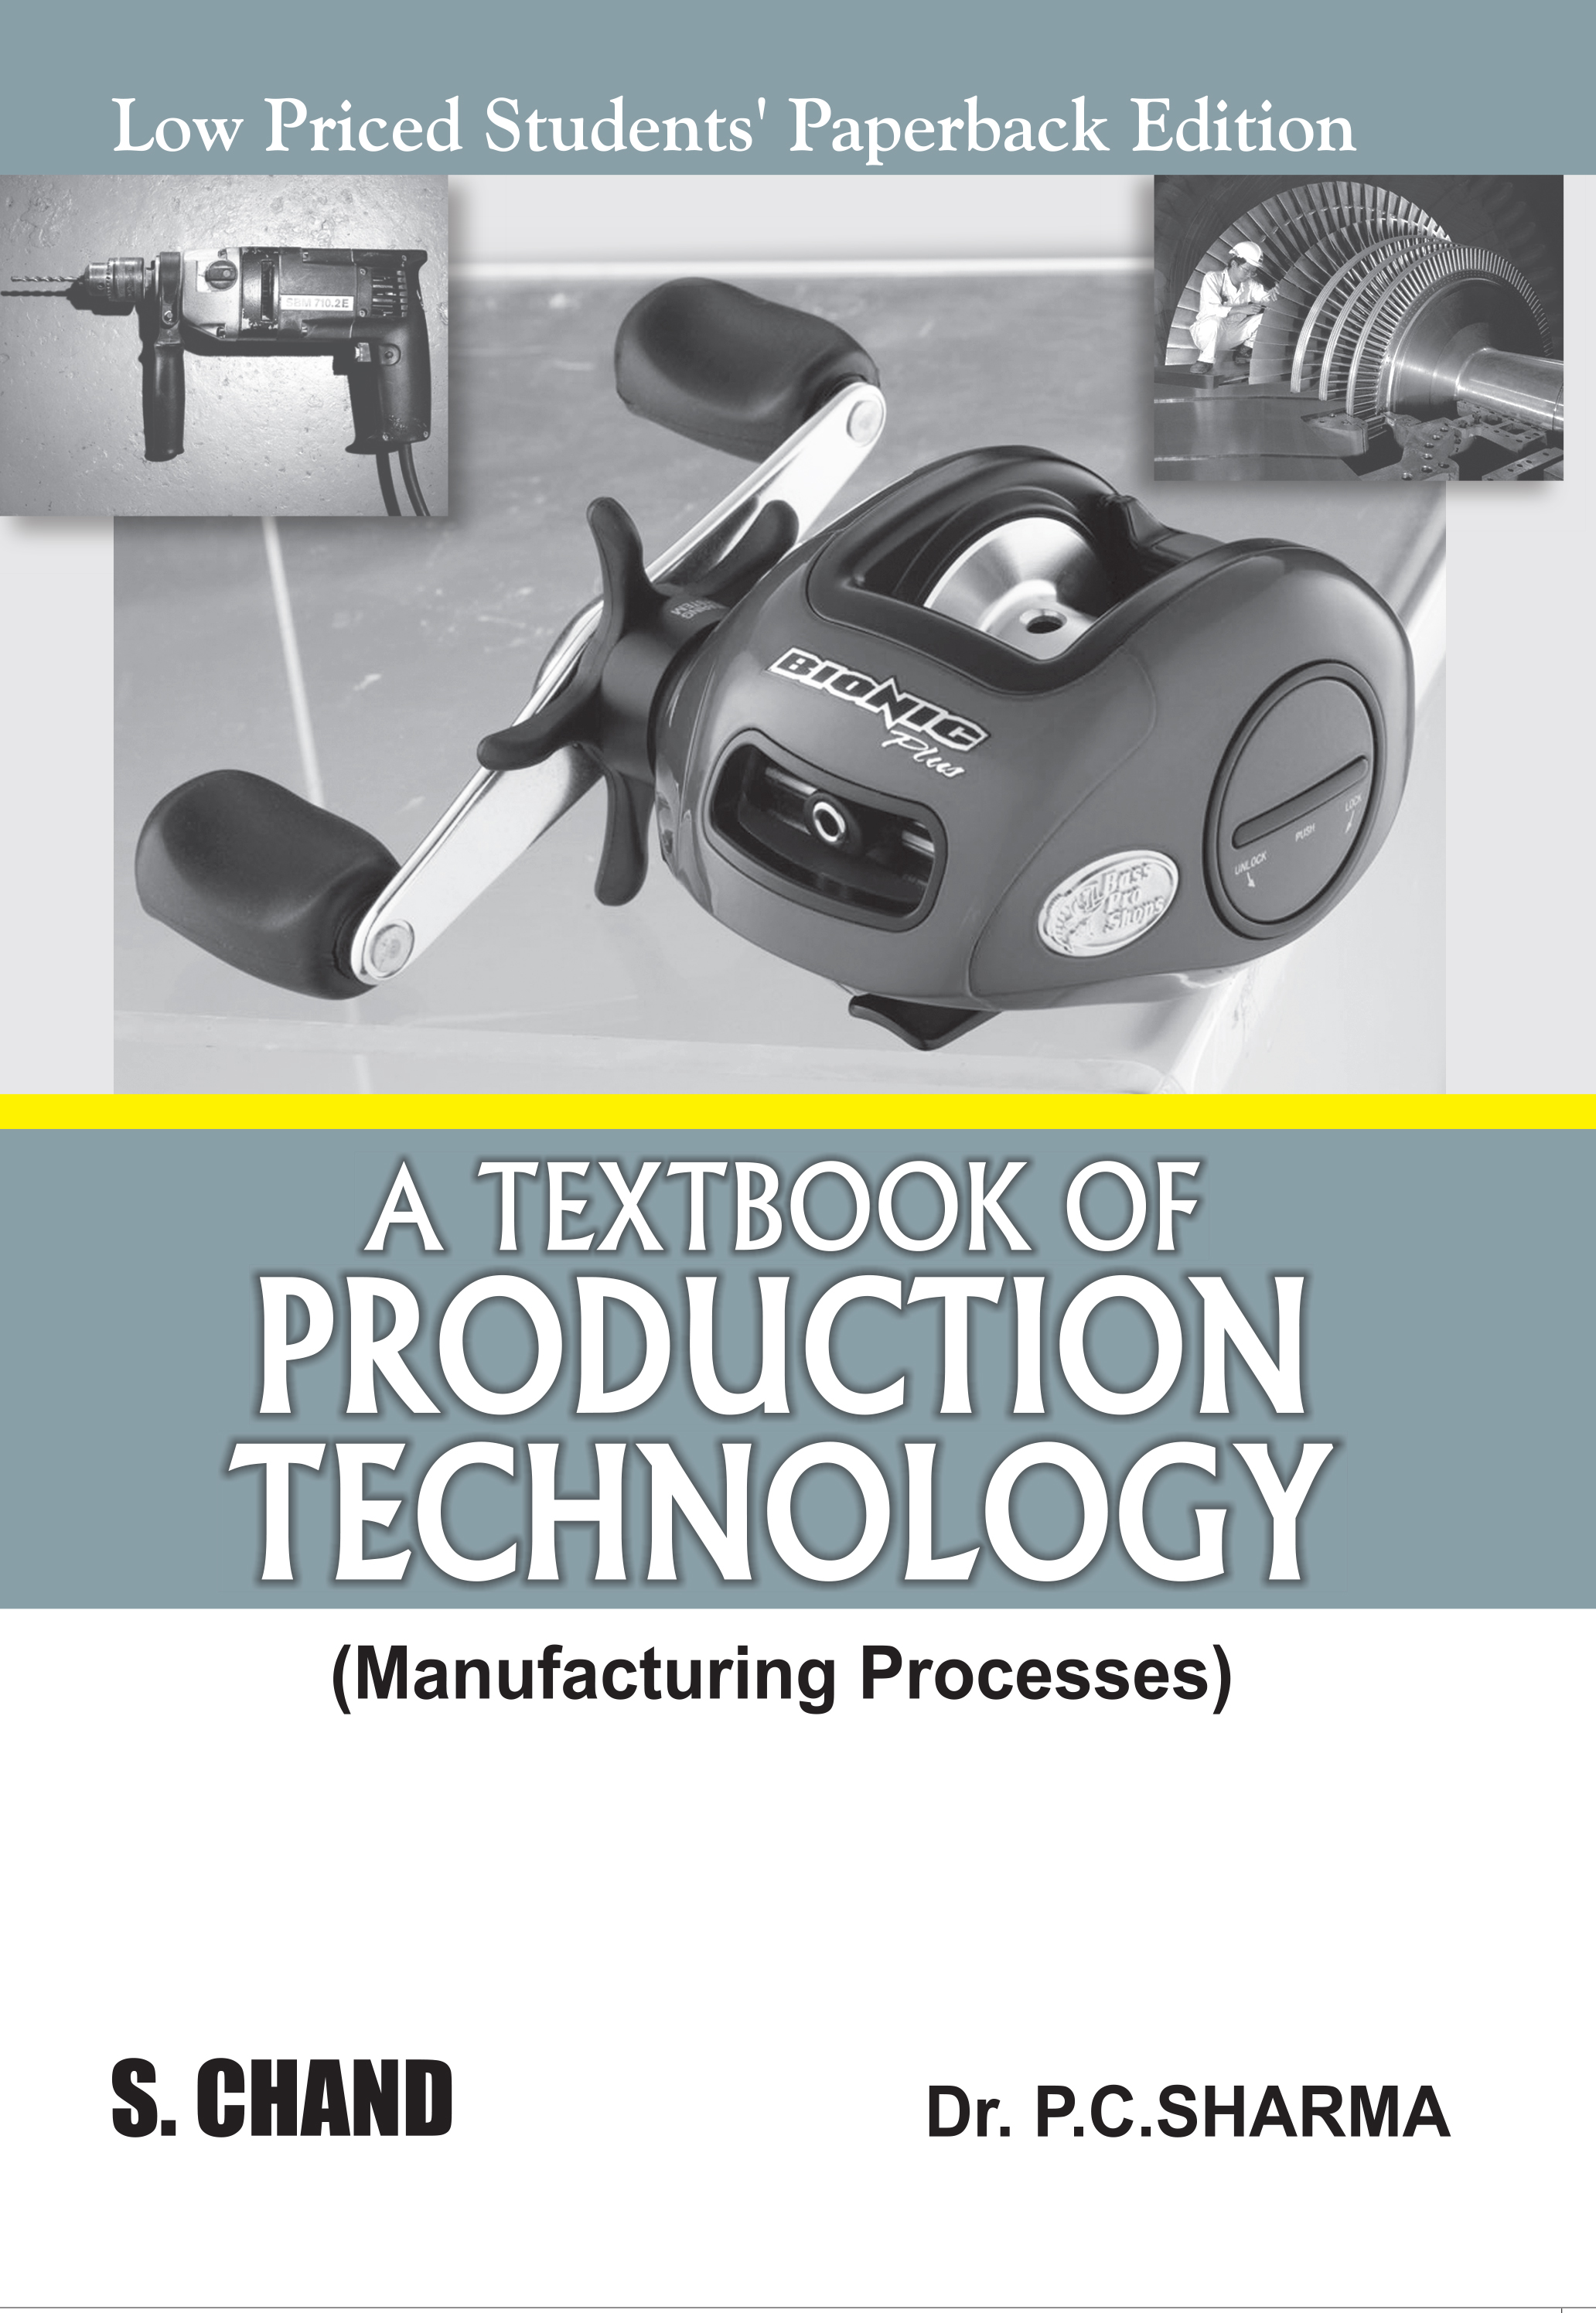 A TEXTBOOK OF PRODUCTION TECHNOLOGY (LPSPE)